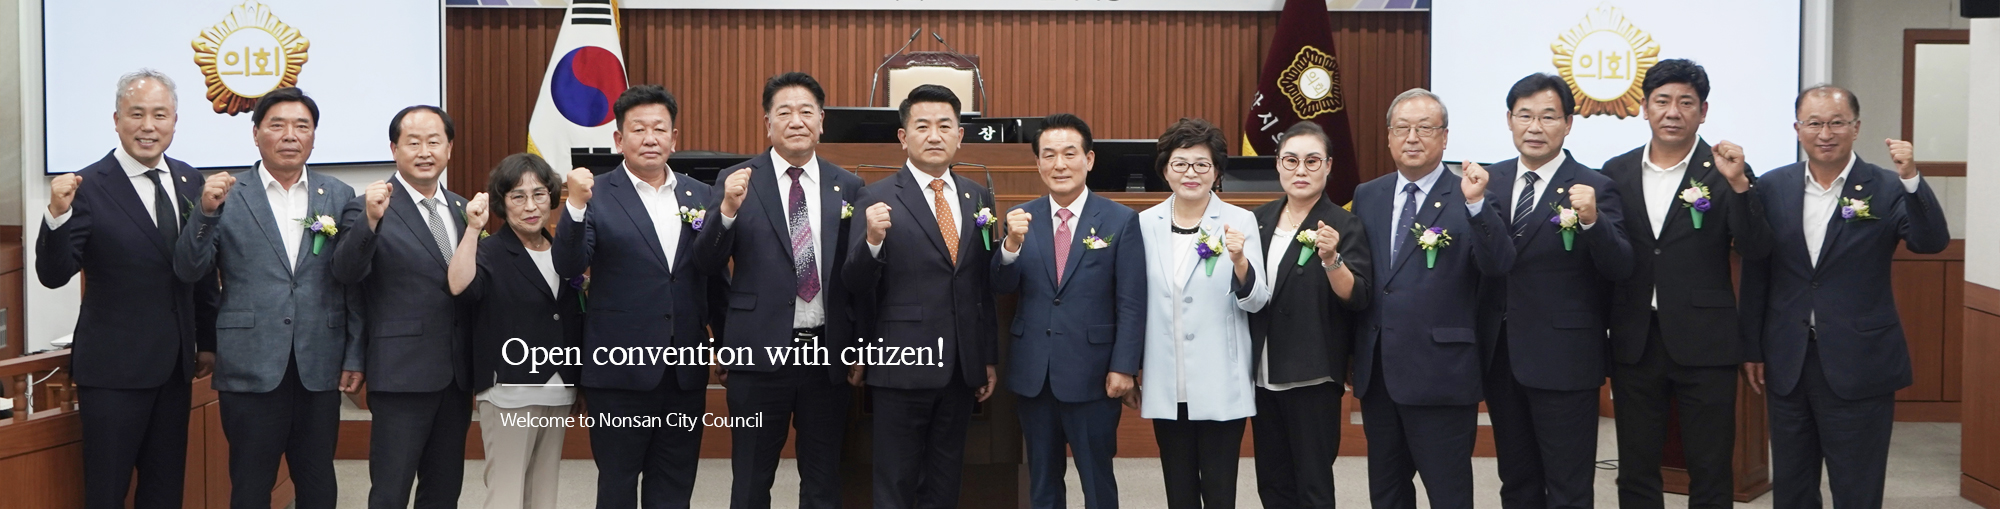 Open convention with citizen! Welcome to Nonsan City Council